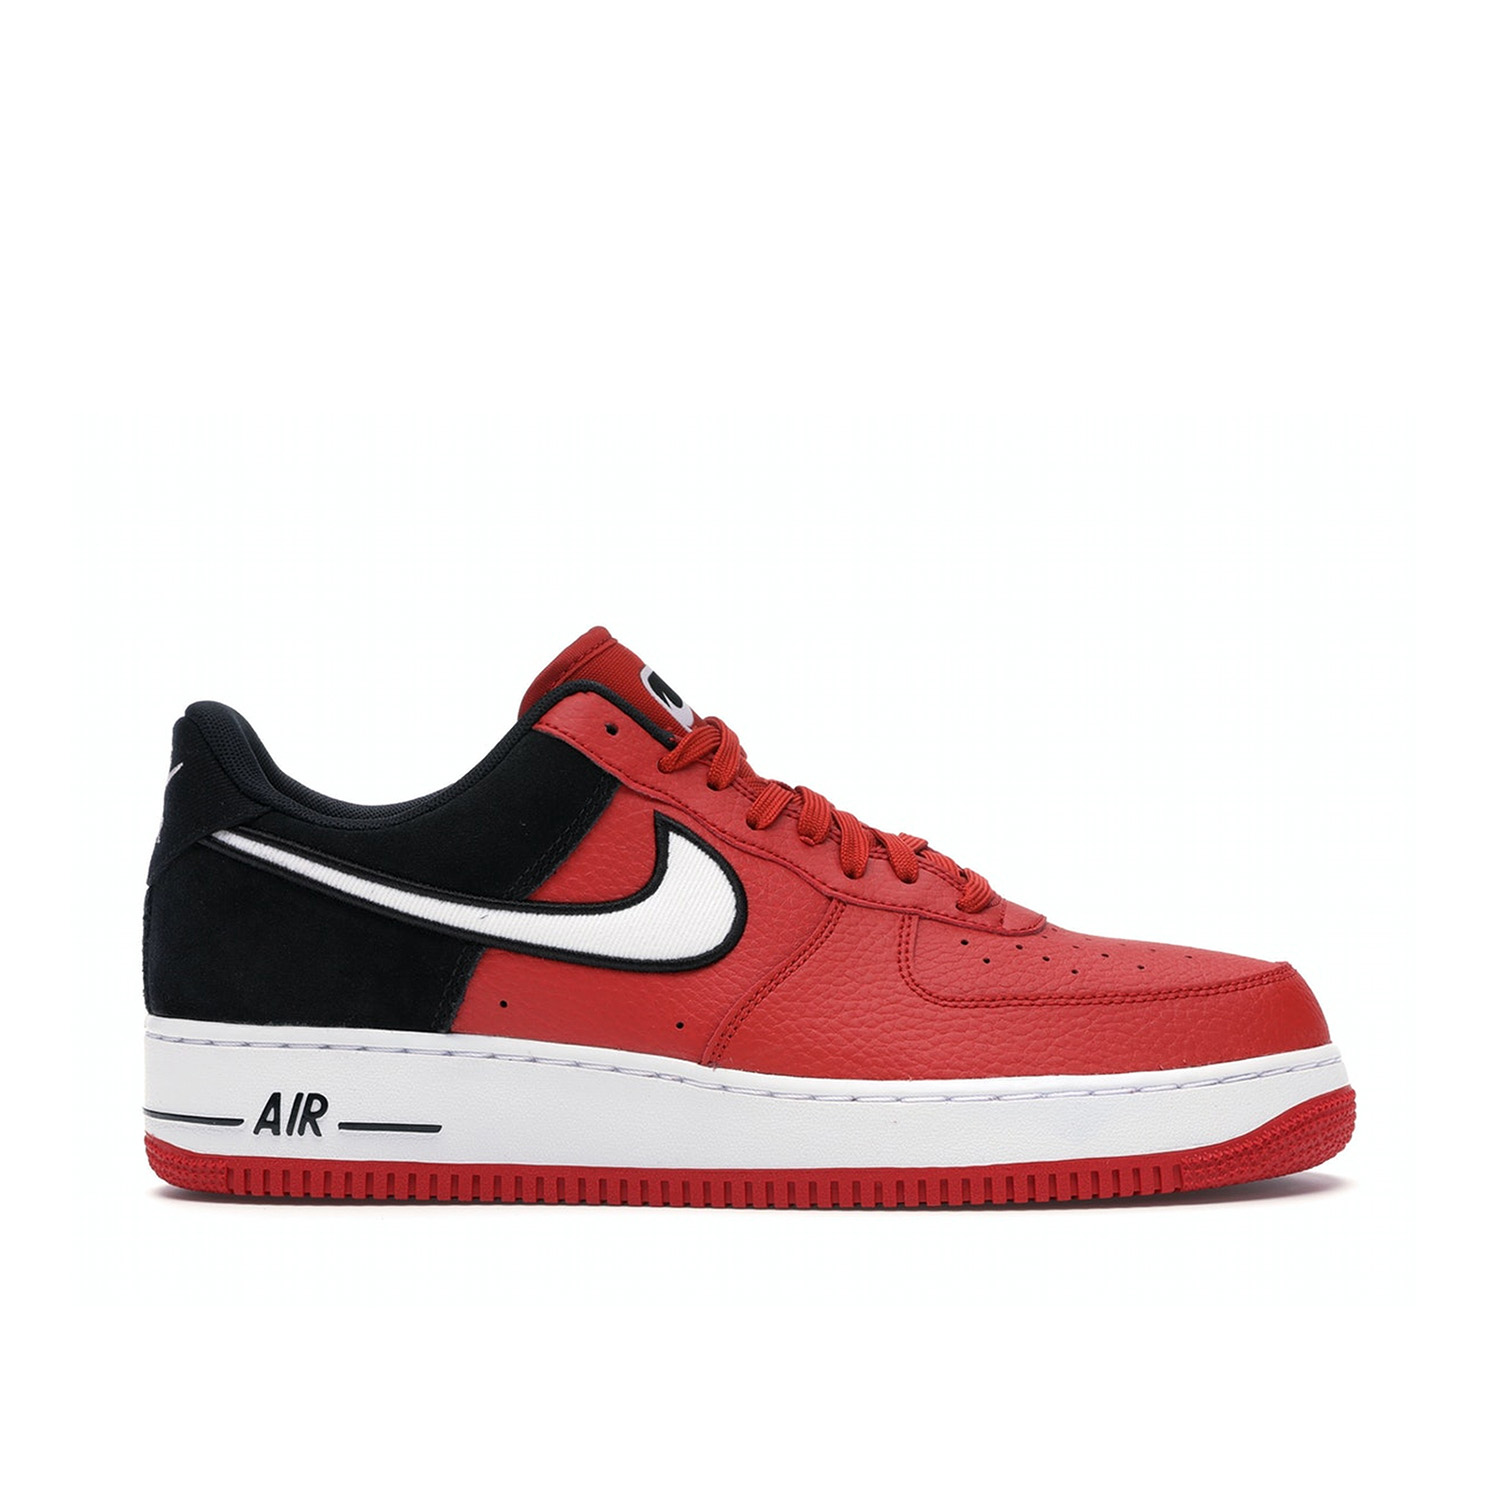 Nike Air Force 1 07 Low LV8 Red Black | AO2439-600 | Laced